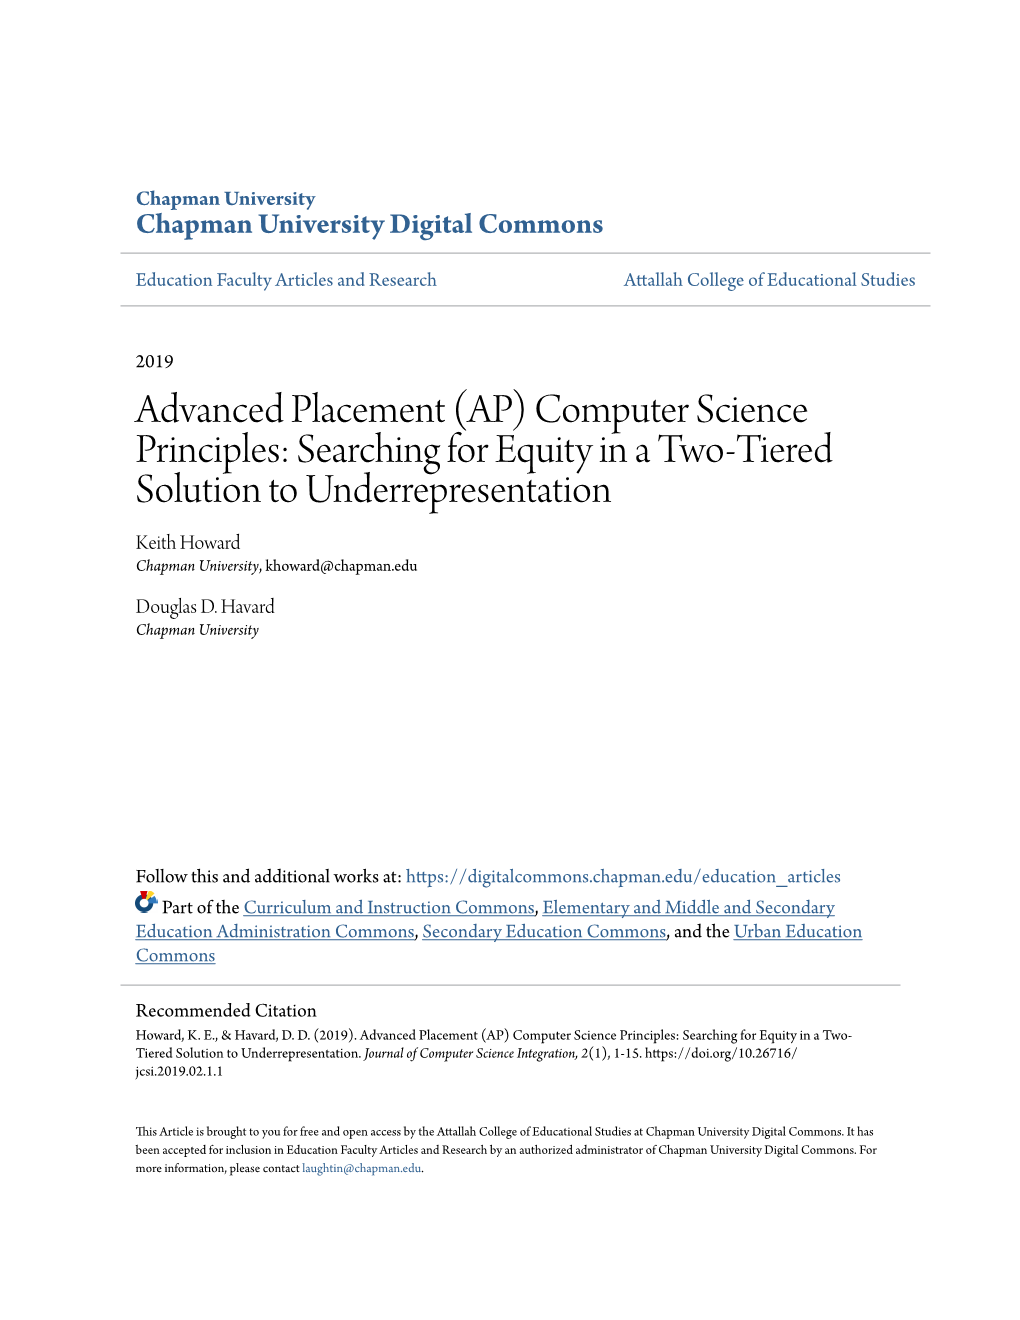 Advanced Placement (AP) Computer Science Principles: Searching For